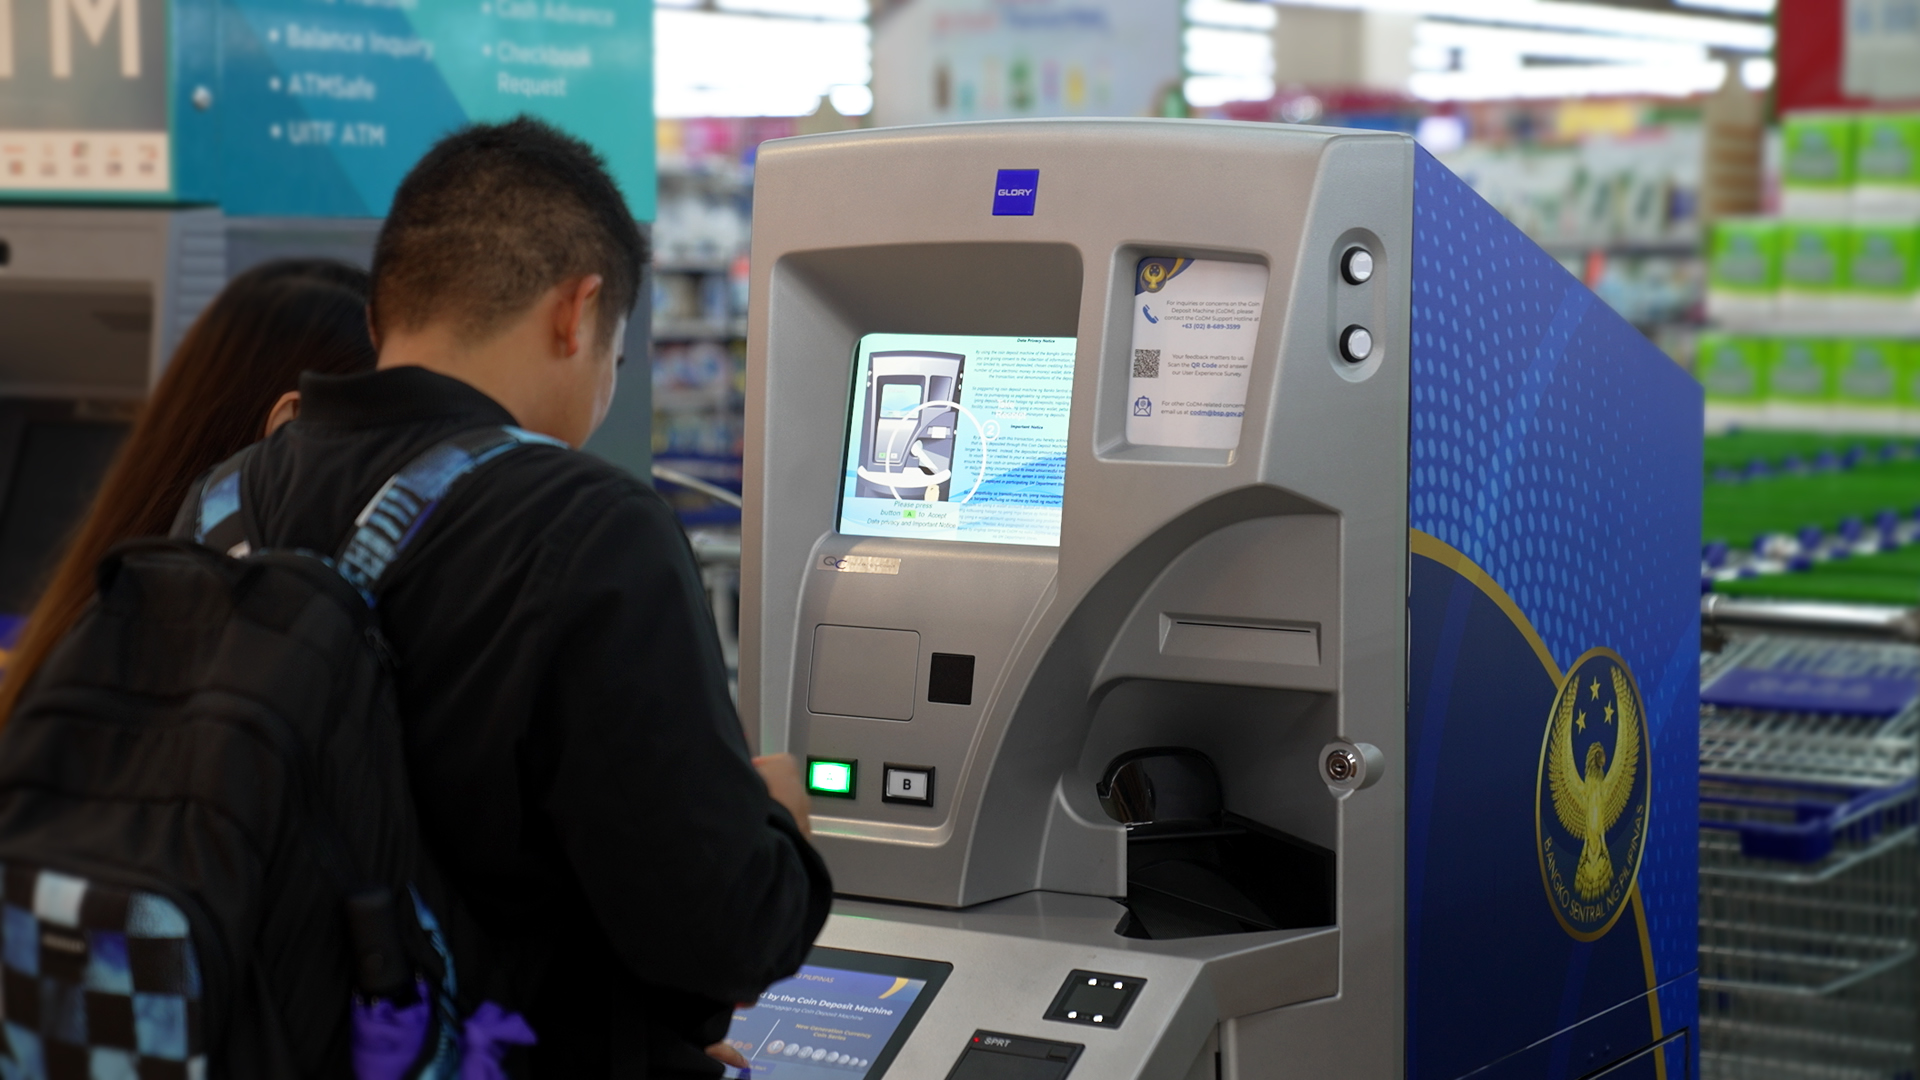 BSP's Coin Deposit Machines Convert Millions of Idle Coins into E- Wallet Credits and Shopping Vouchers